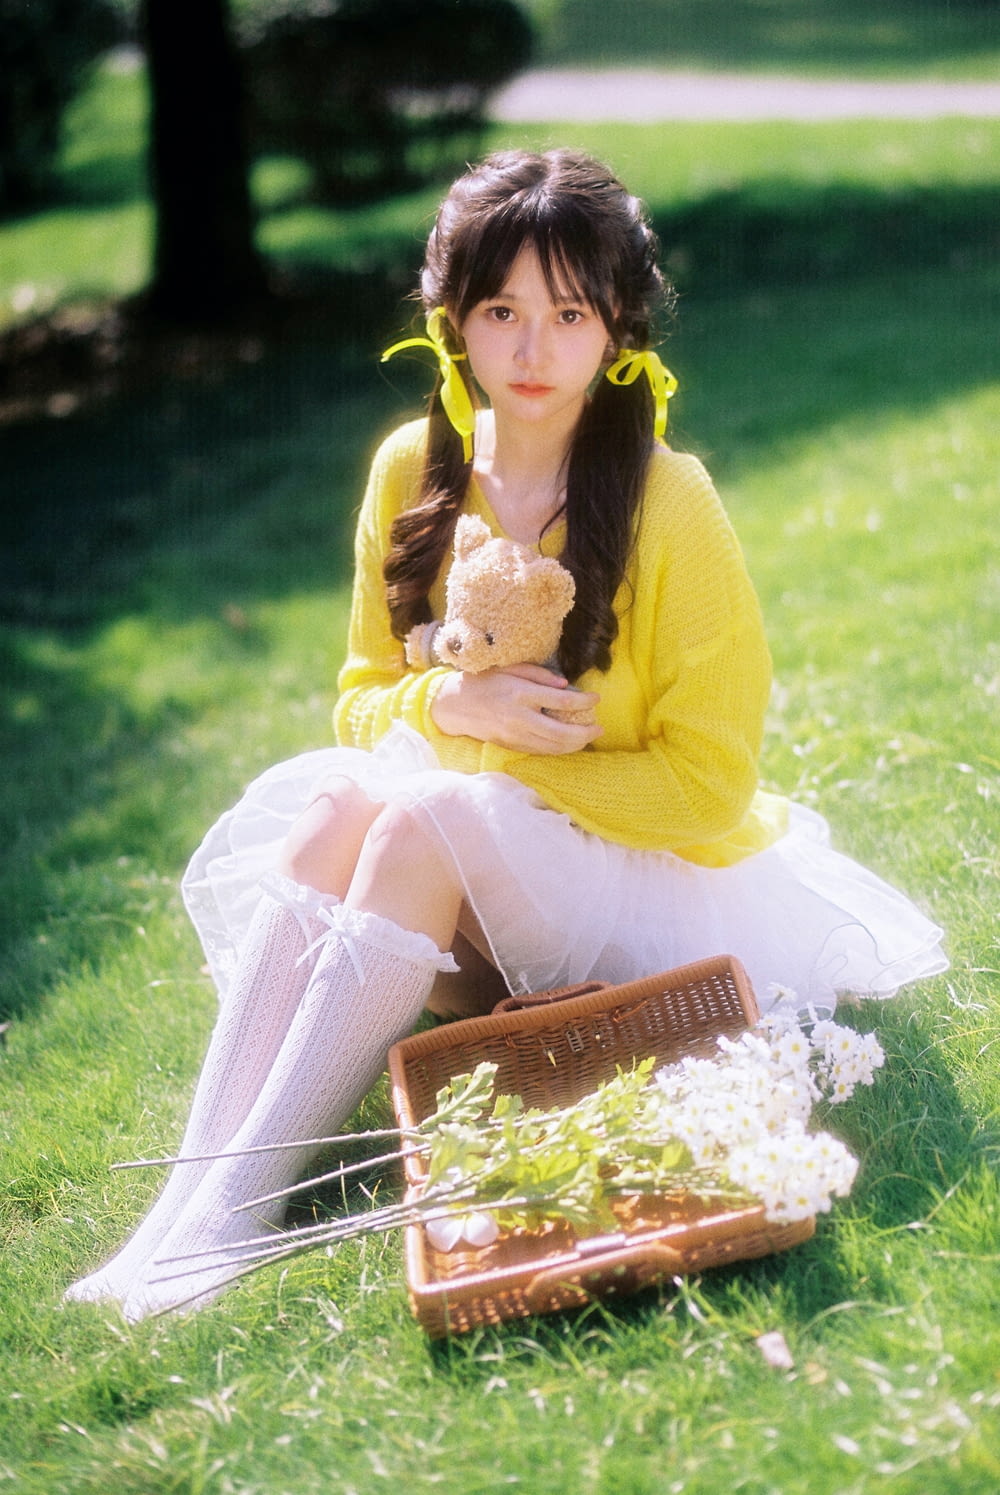 a woman sitting in the grass holding a teddy bear